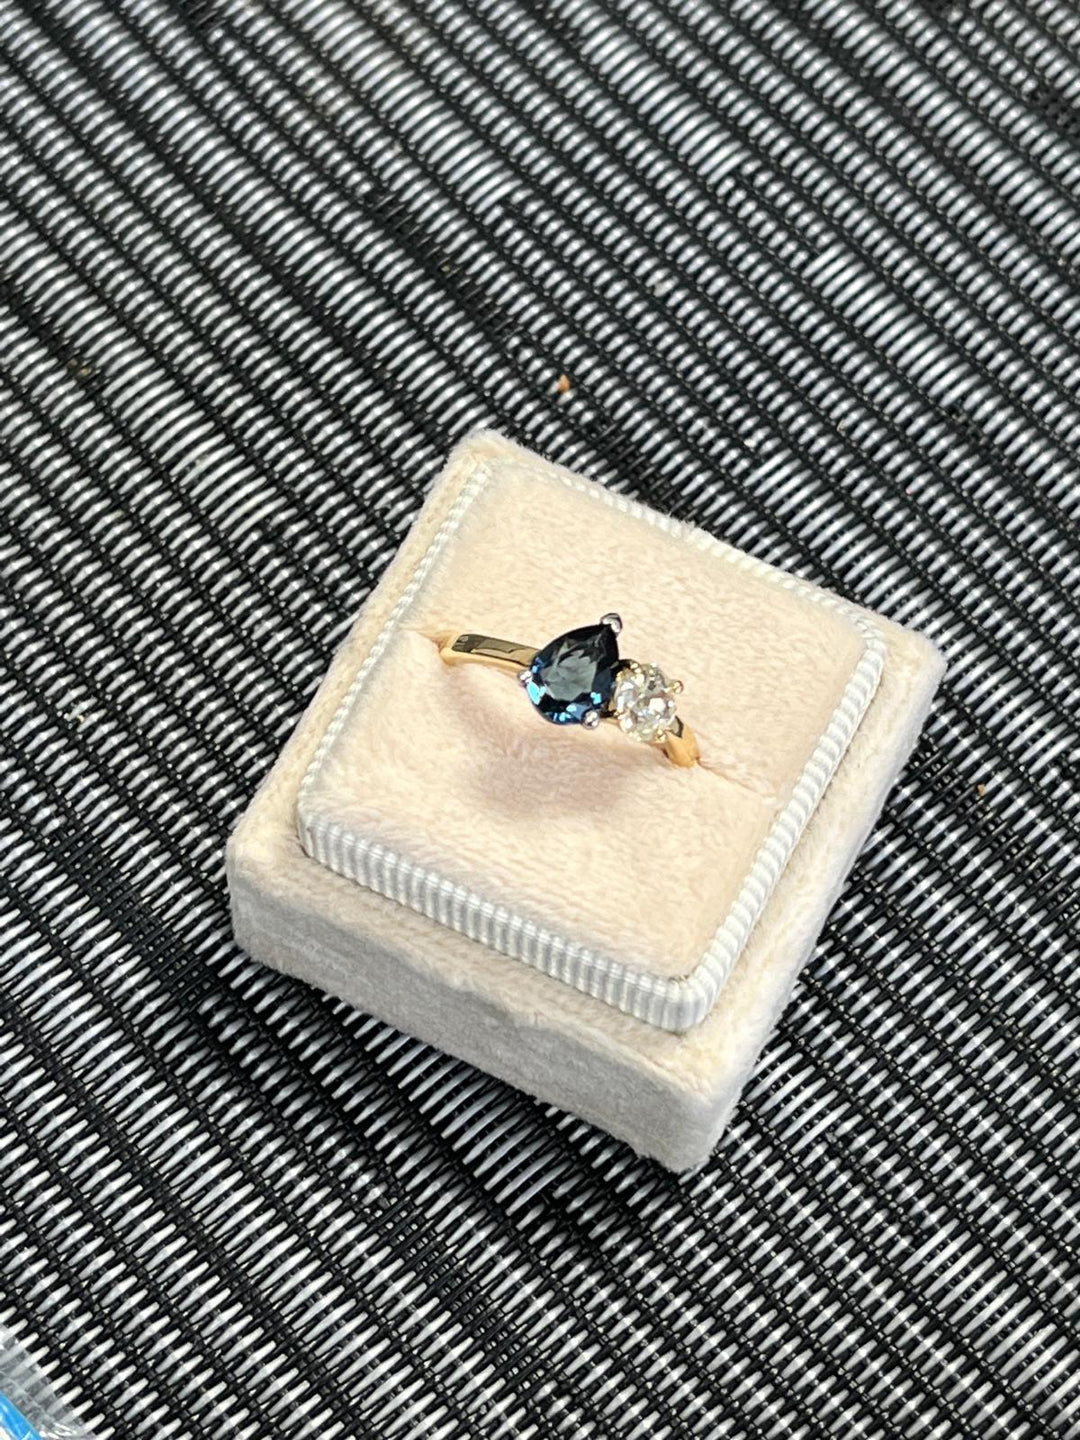 1.49 CTW Antique Diamond and Blue Sapphire Toi et Moi Ring in 18ct Gold